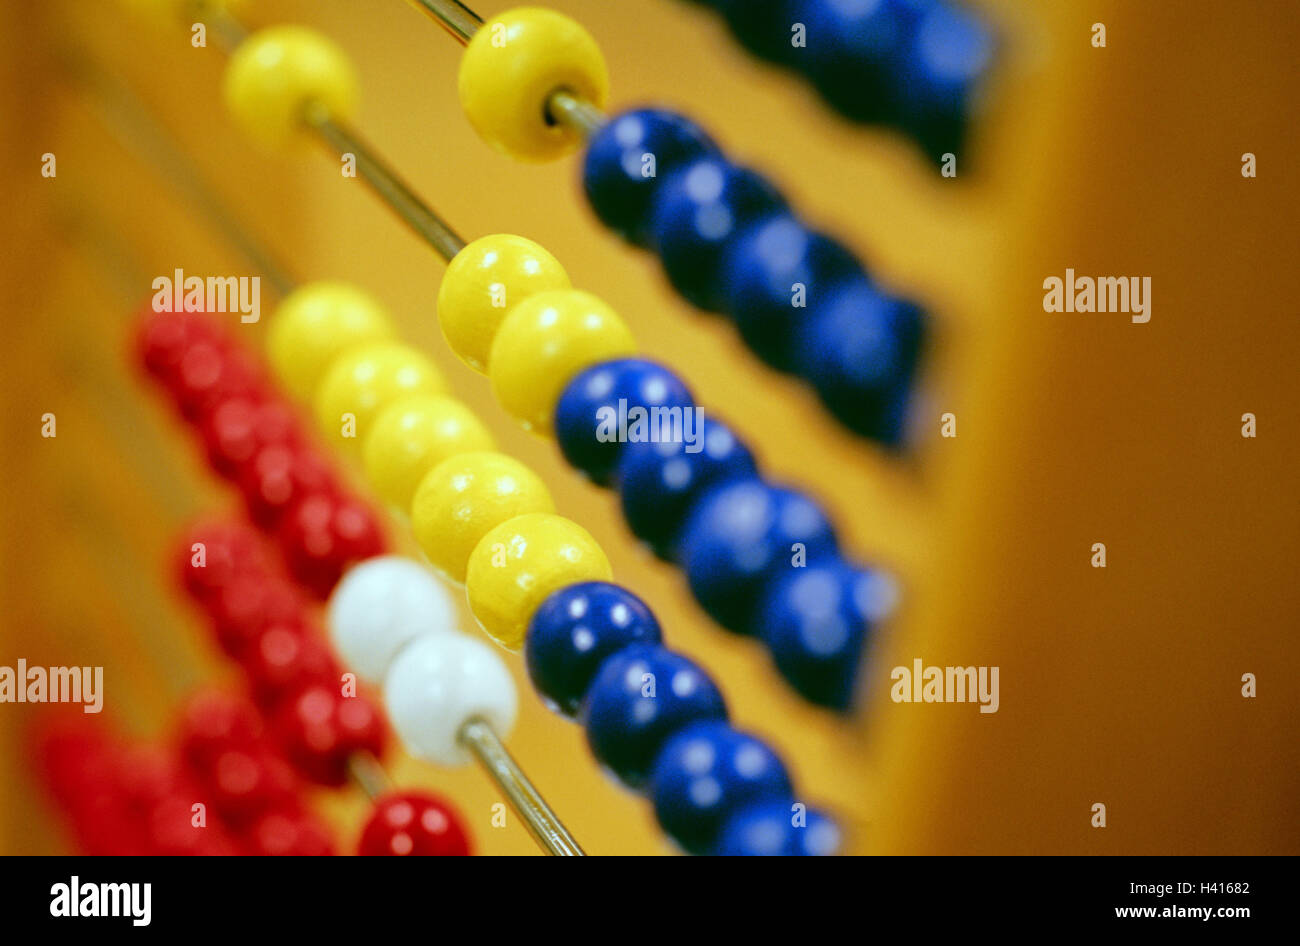 Abaci, close up, slide rule, calculation, count, arithmetic help, accessory, abacus, becomes outdated, addition, subtraction, plus, below, rails, sphere, mathematics, product photography, Still life, conception Stock Photo